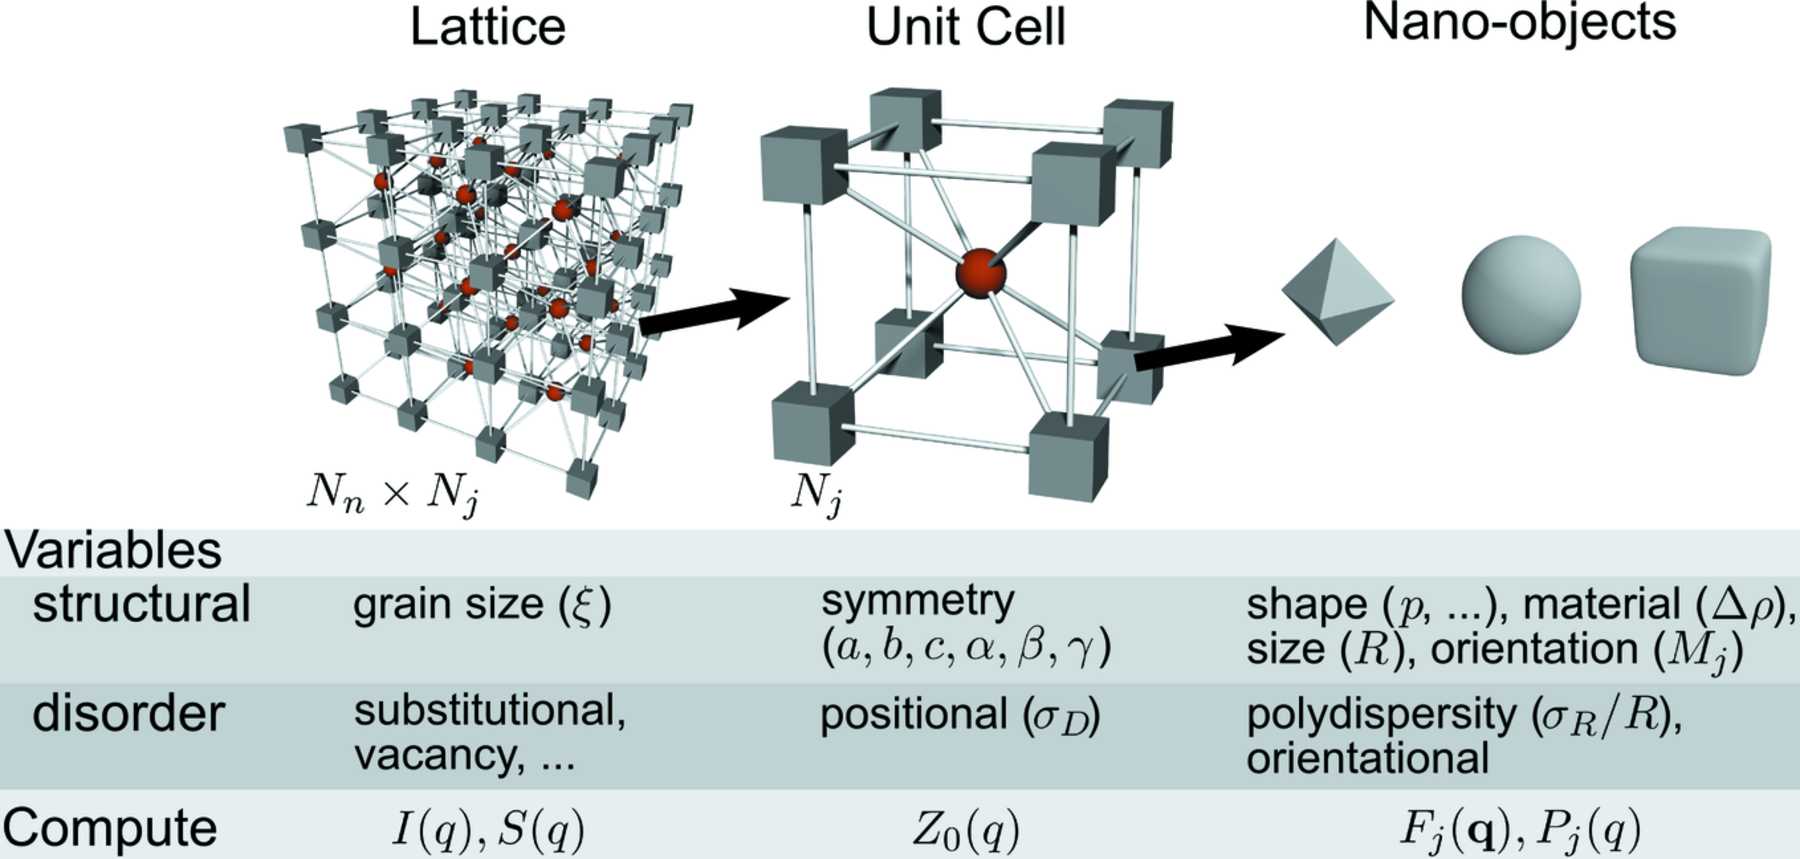 Iucr Periodic Lattices Of Arbitrary Nano Objects Modeling And Applications For Self Assembled Systems